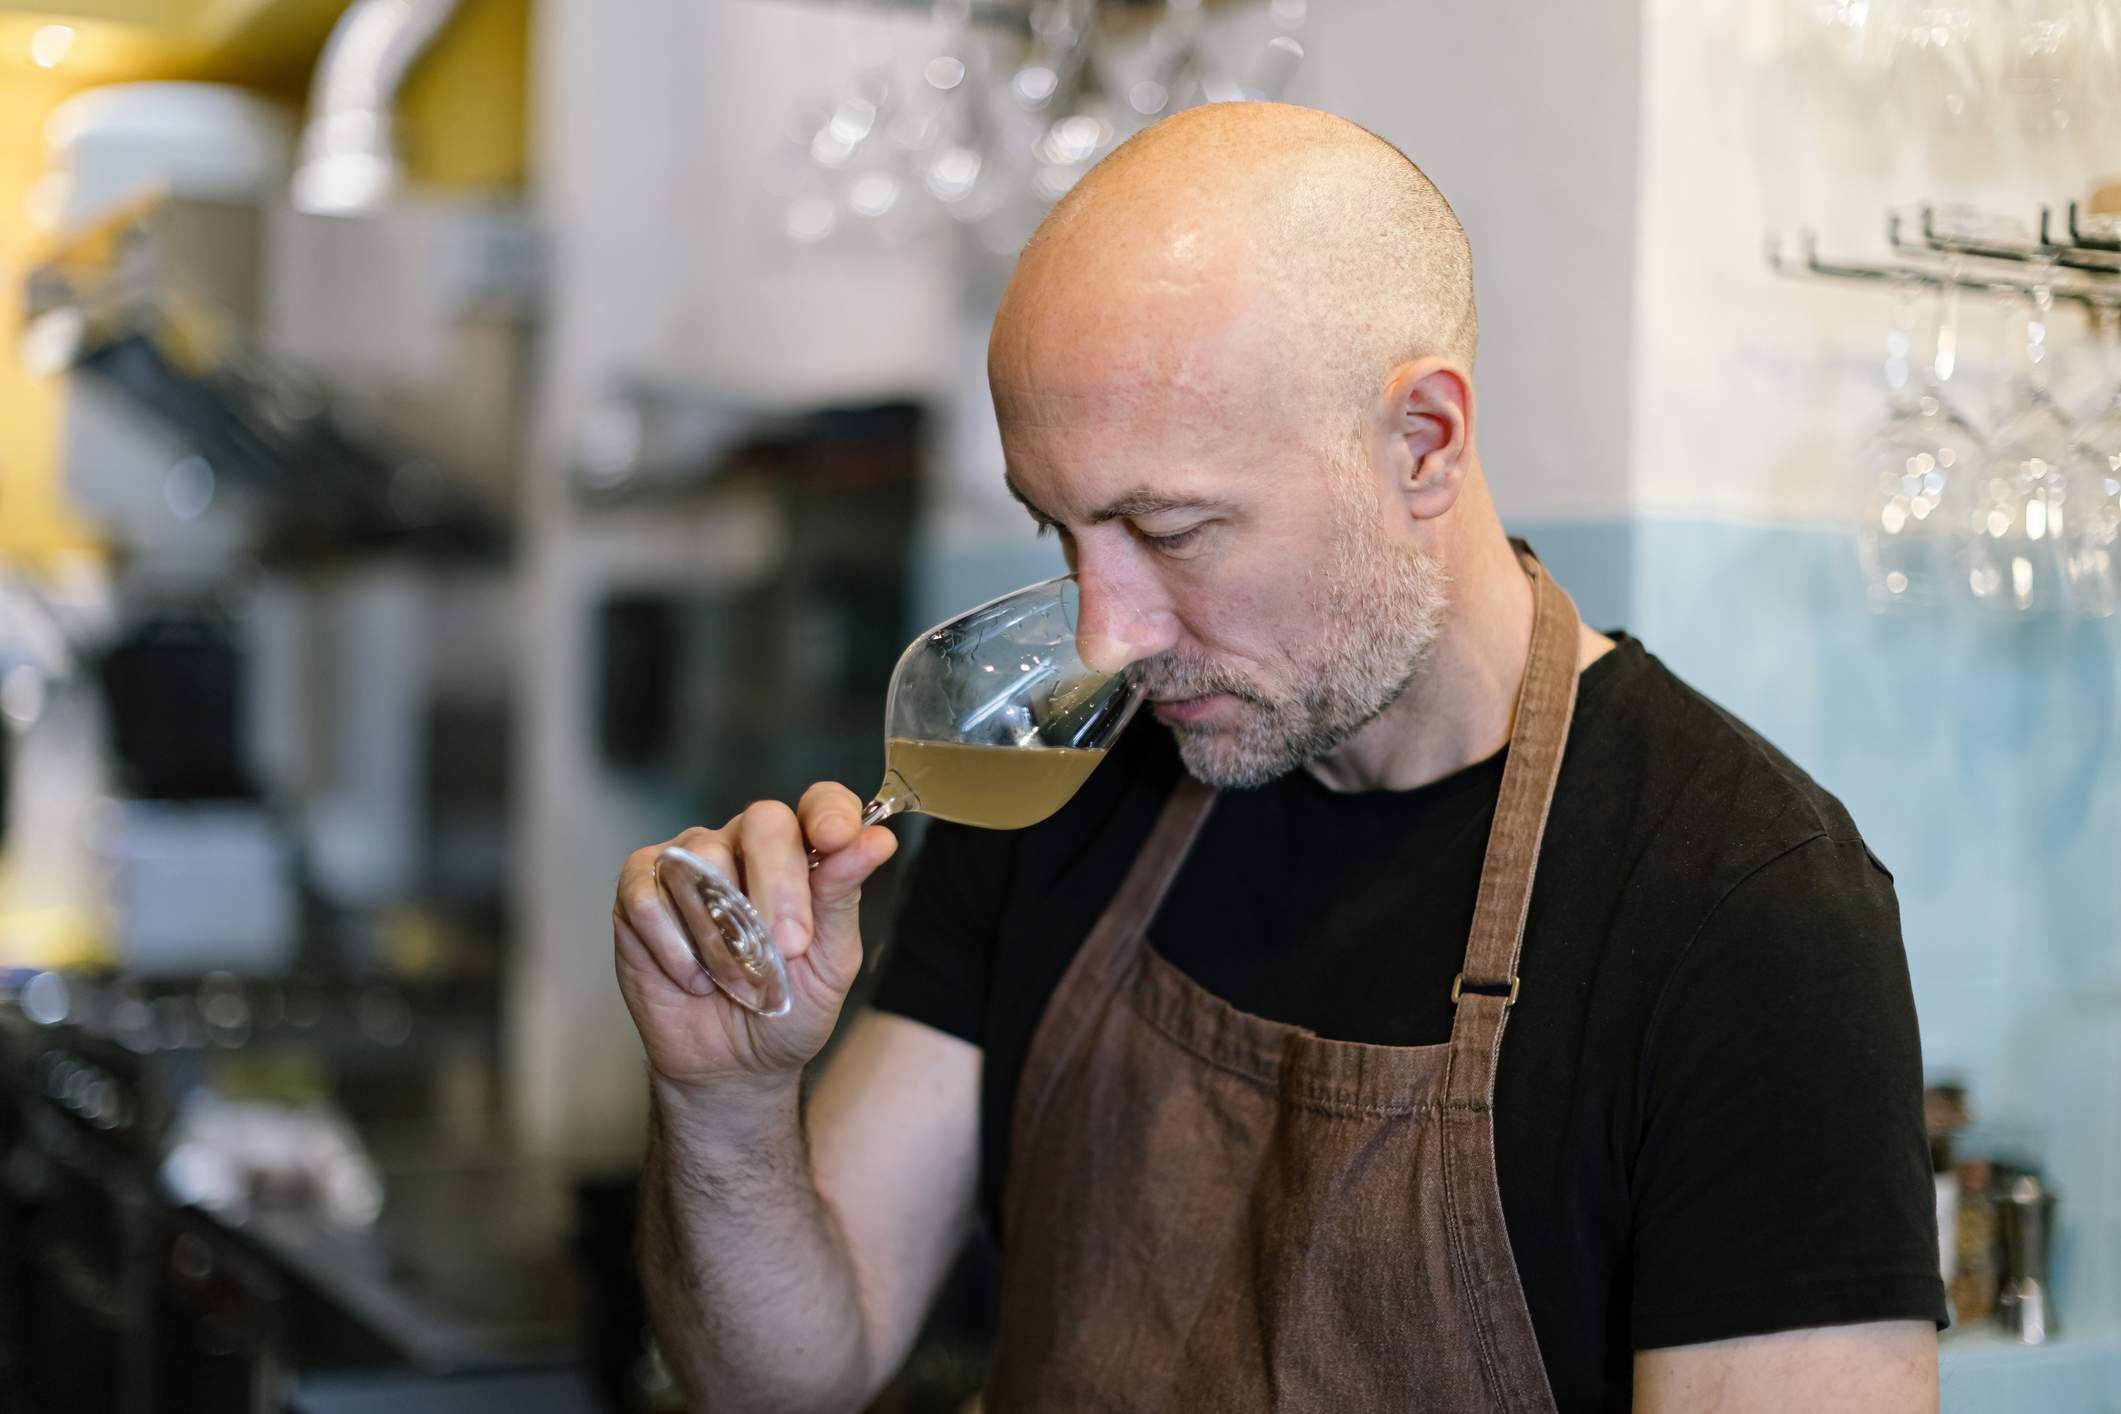 Image depicts a sommelier smelling wine.